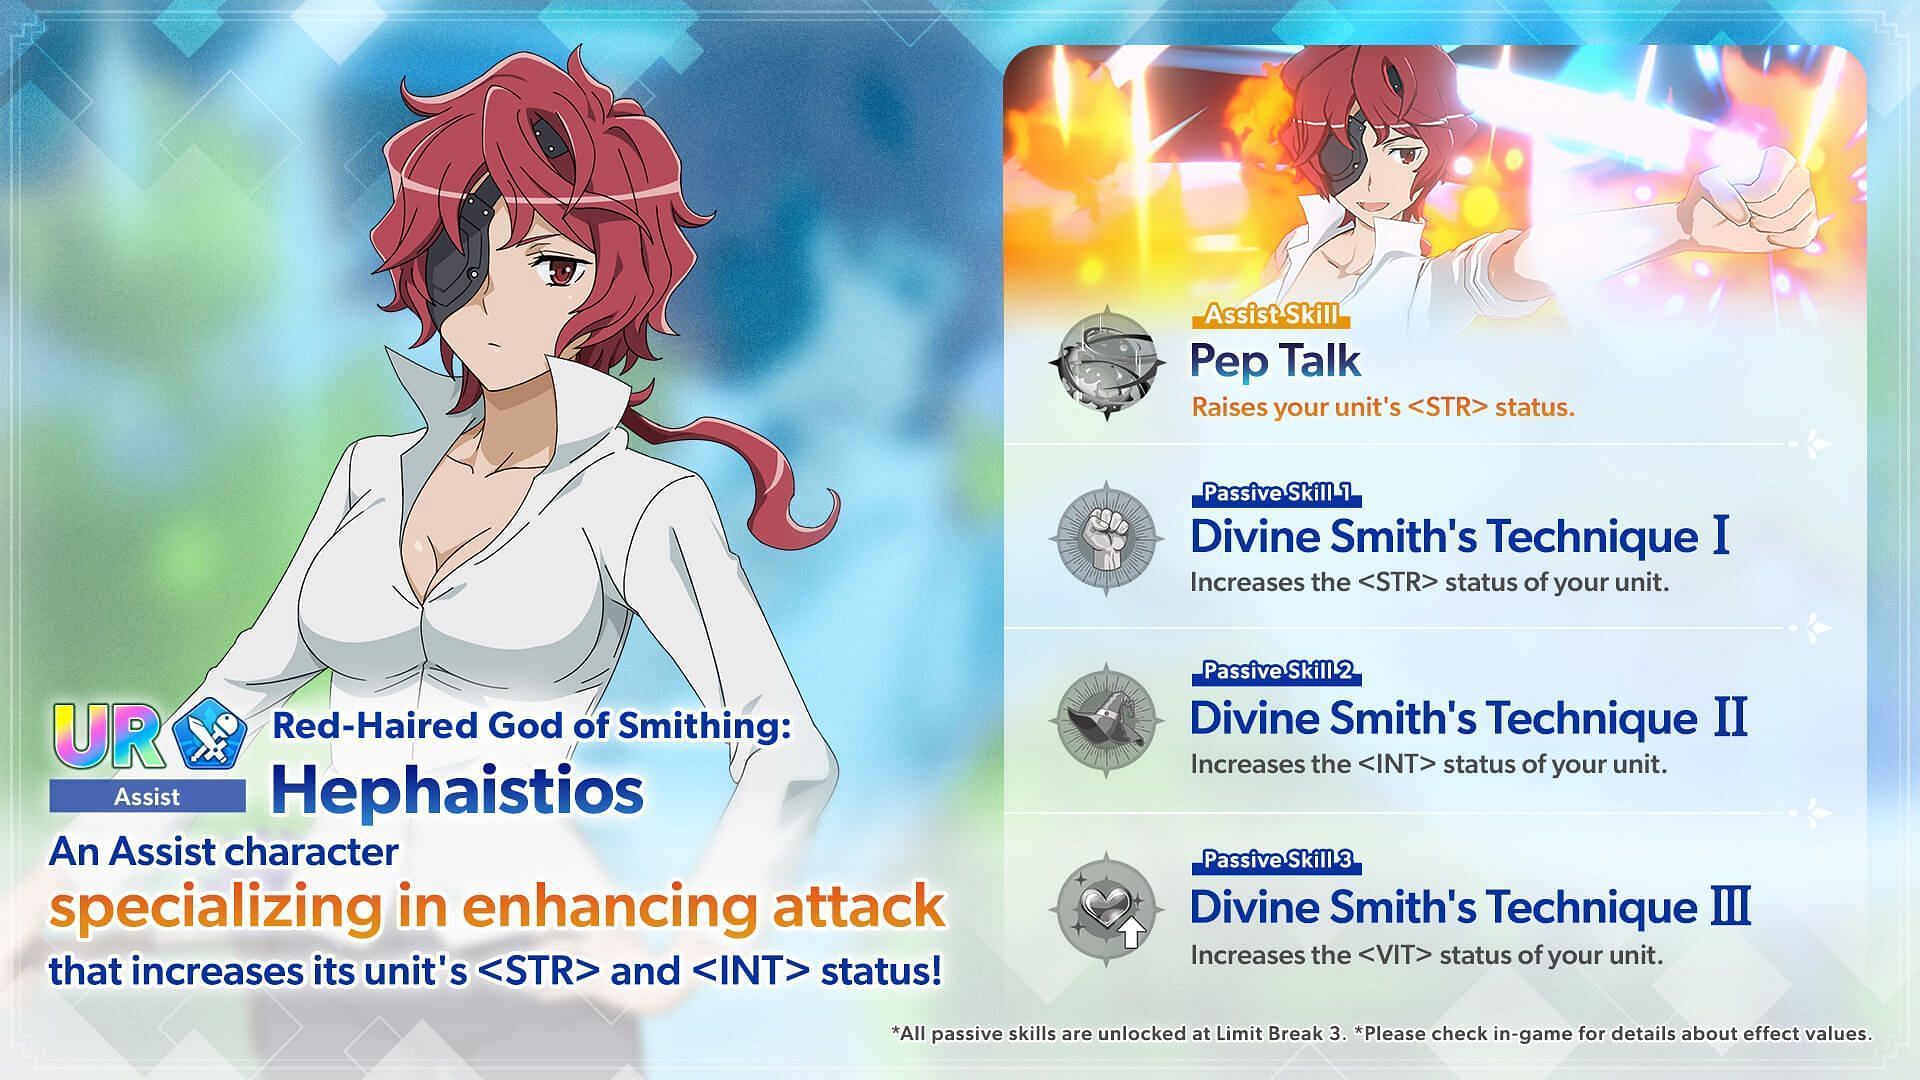 Red-Haired God of Smithing: Hephaistios in DanMachi Battle Chronicle. (Image via Aiming Inc.)